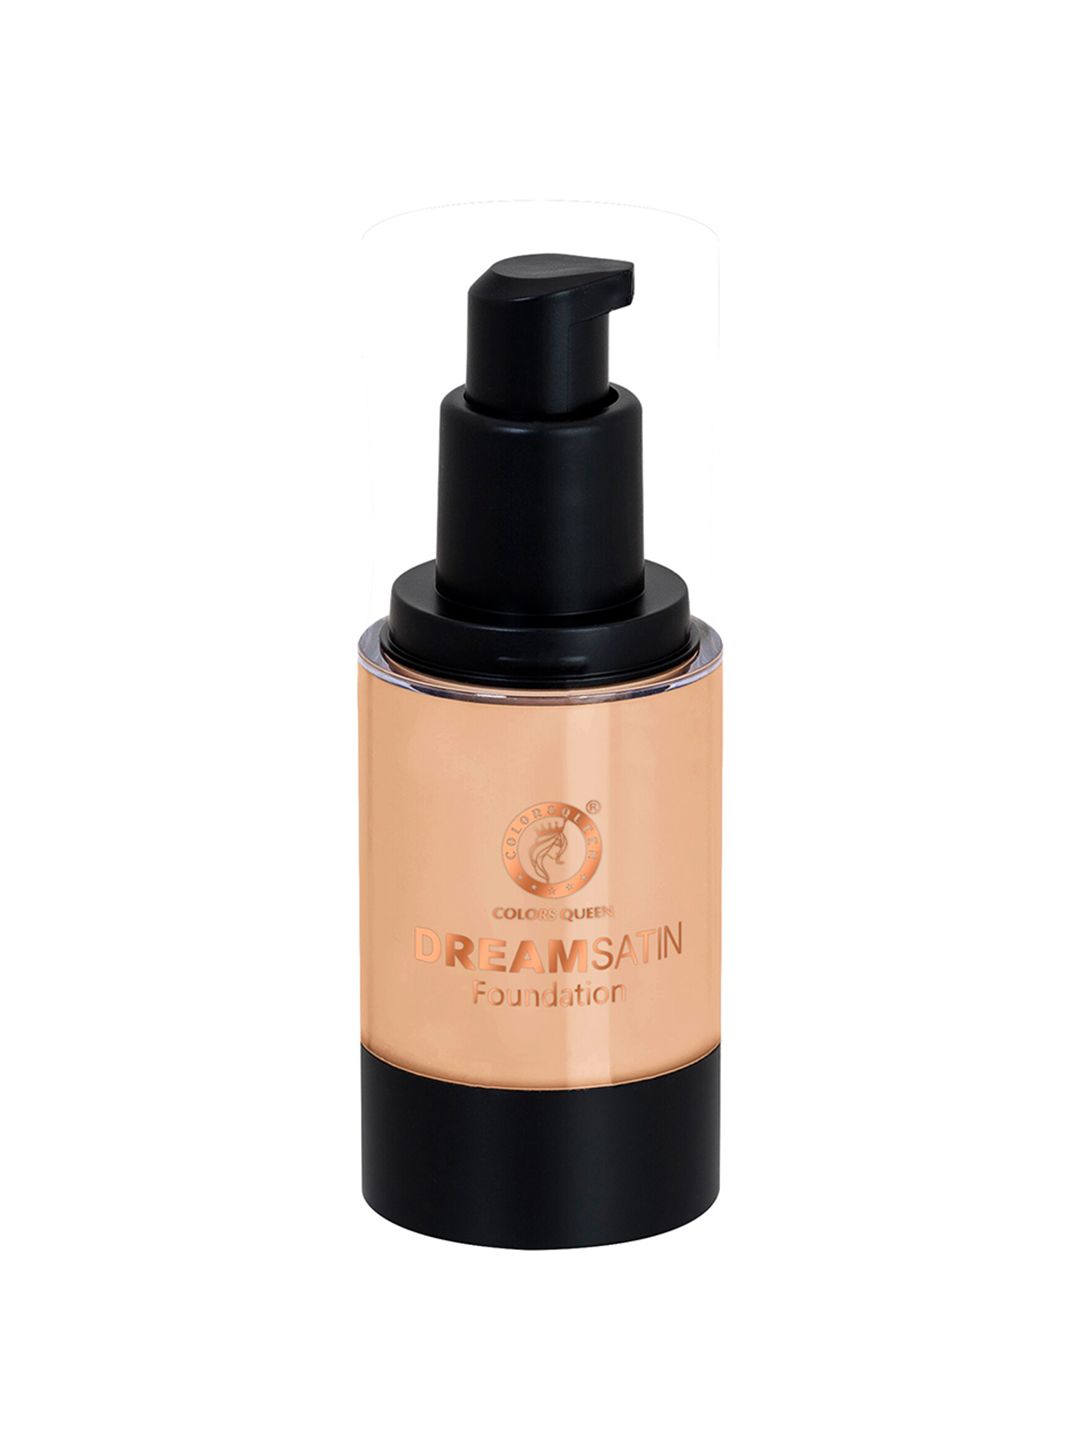 Colors Queen Dream Satin Oil Free Water Proof Foundation Price in India